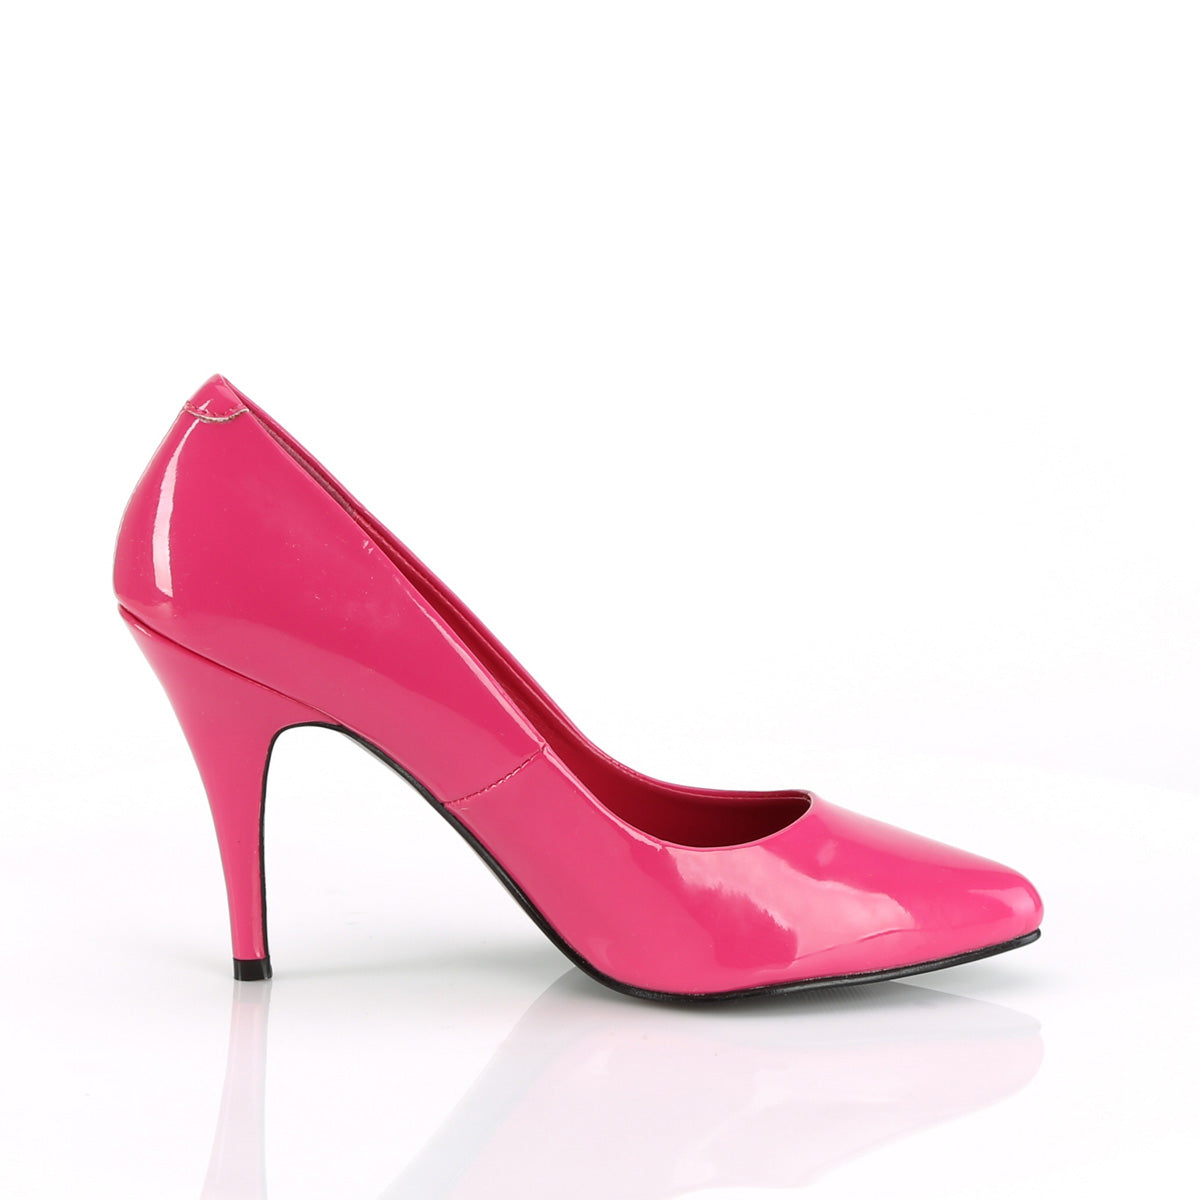 VANITY-420 Pleaser H Pink Patent Single Sole Shoes [Fetish Shoes]